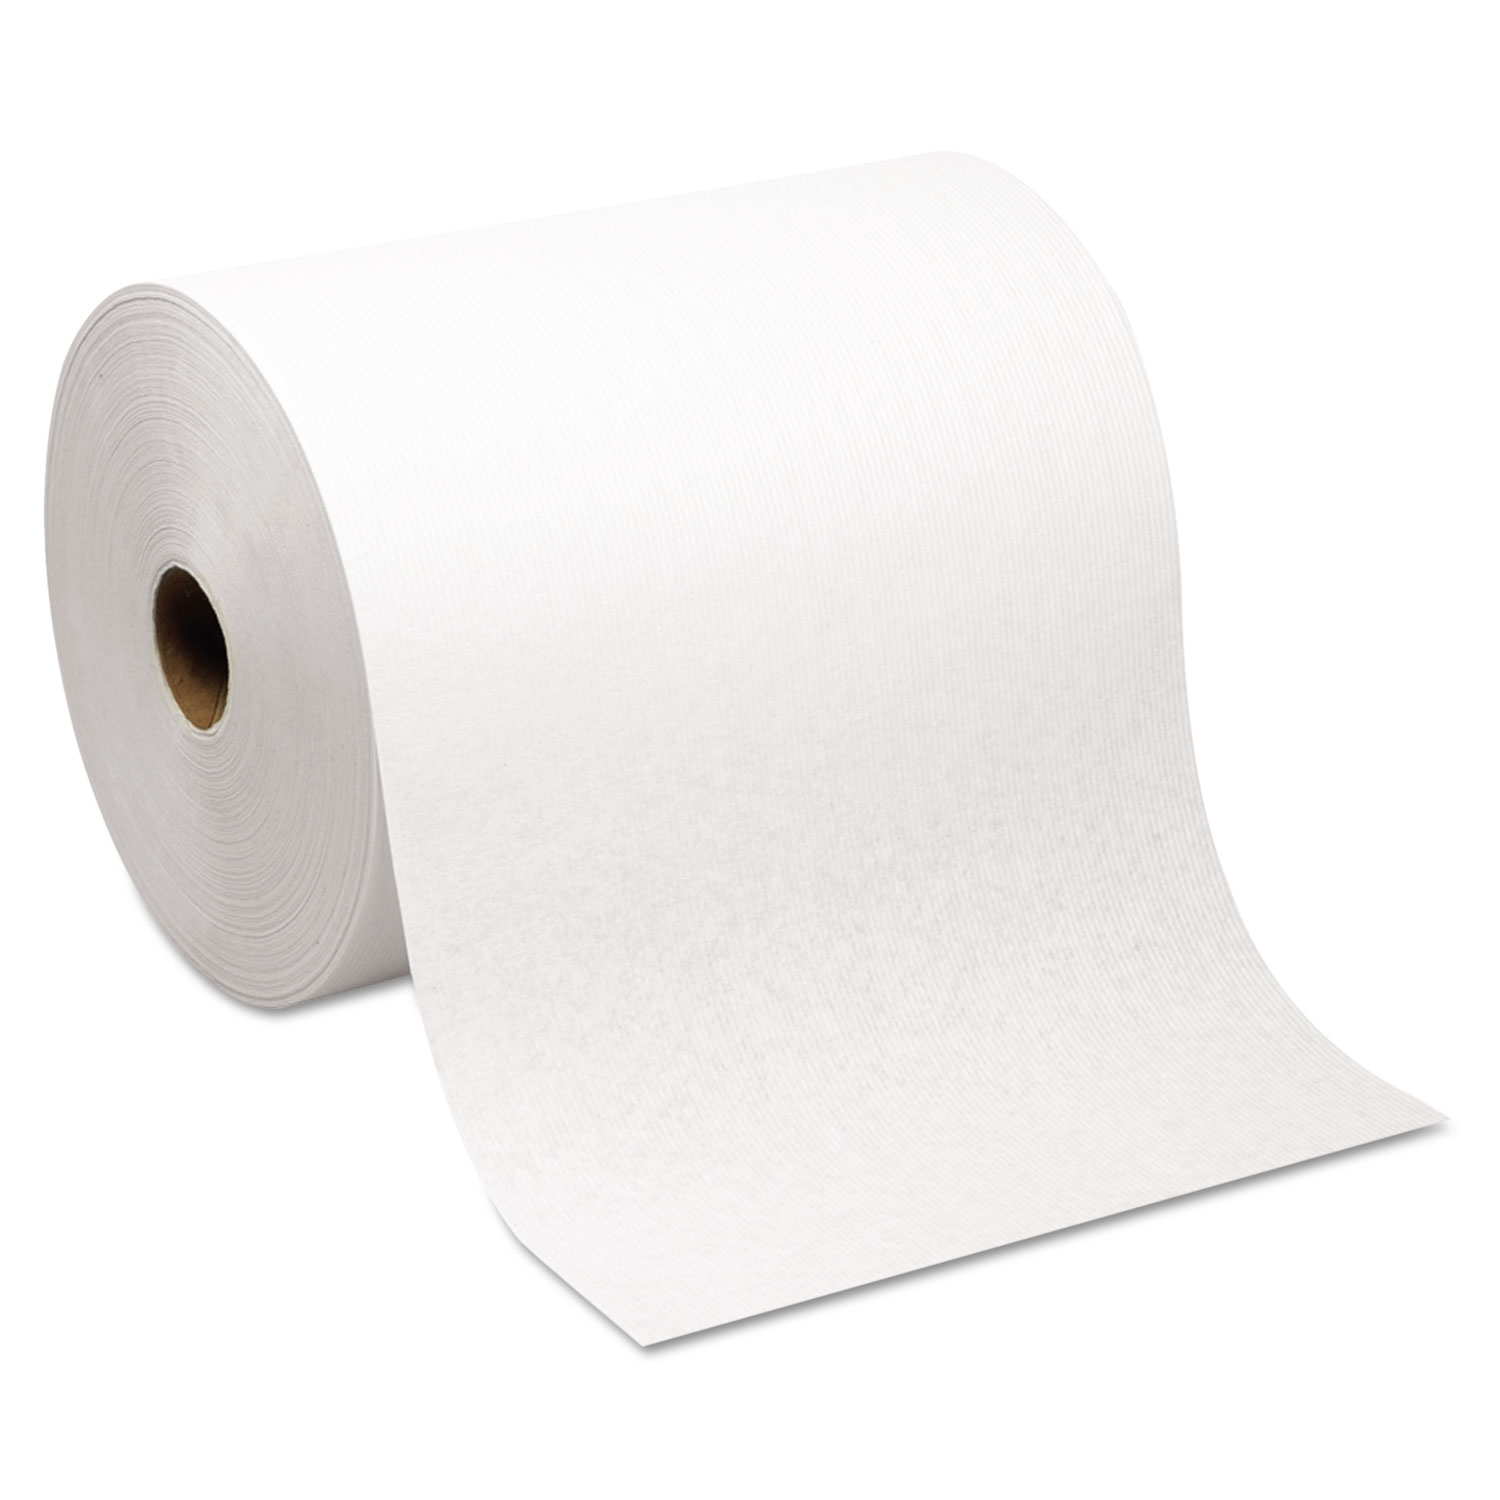  Georgia Pacific Professional 26470 Hardwound Roll Paper Towel, Nonperforated, 7.87 x 1000ft, White, 6 Rolls/Carton (GPC26470) 